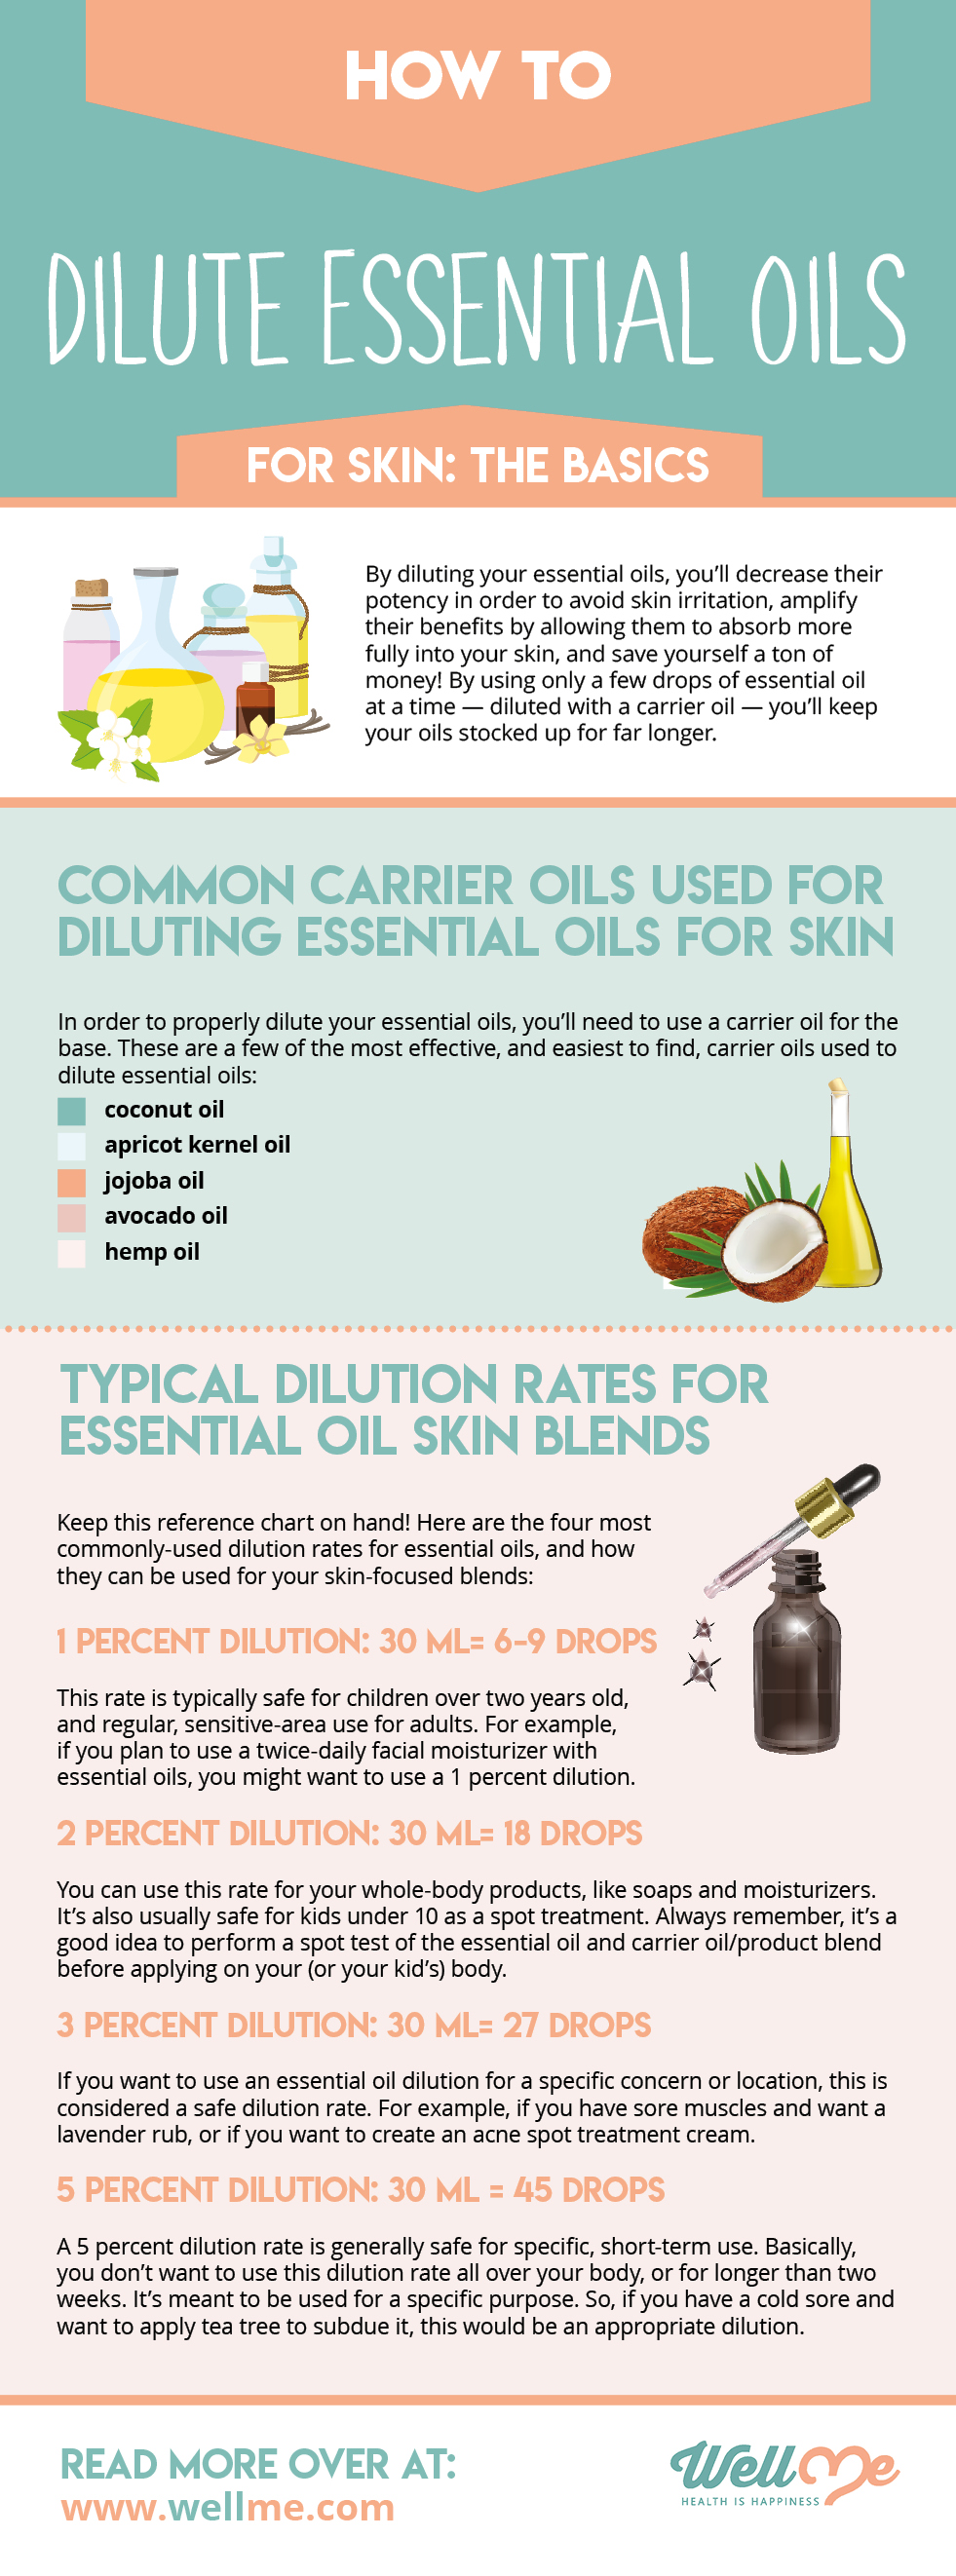 How to Dilute Essential Oils for Skin: The Basics infographic